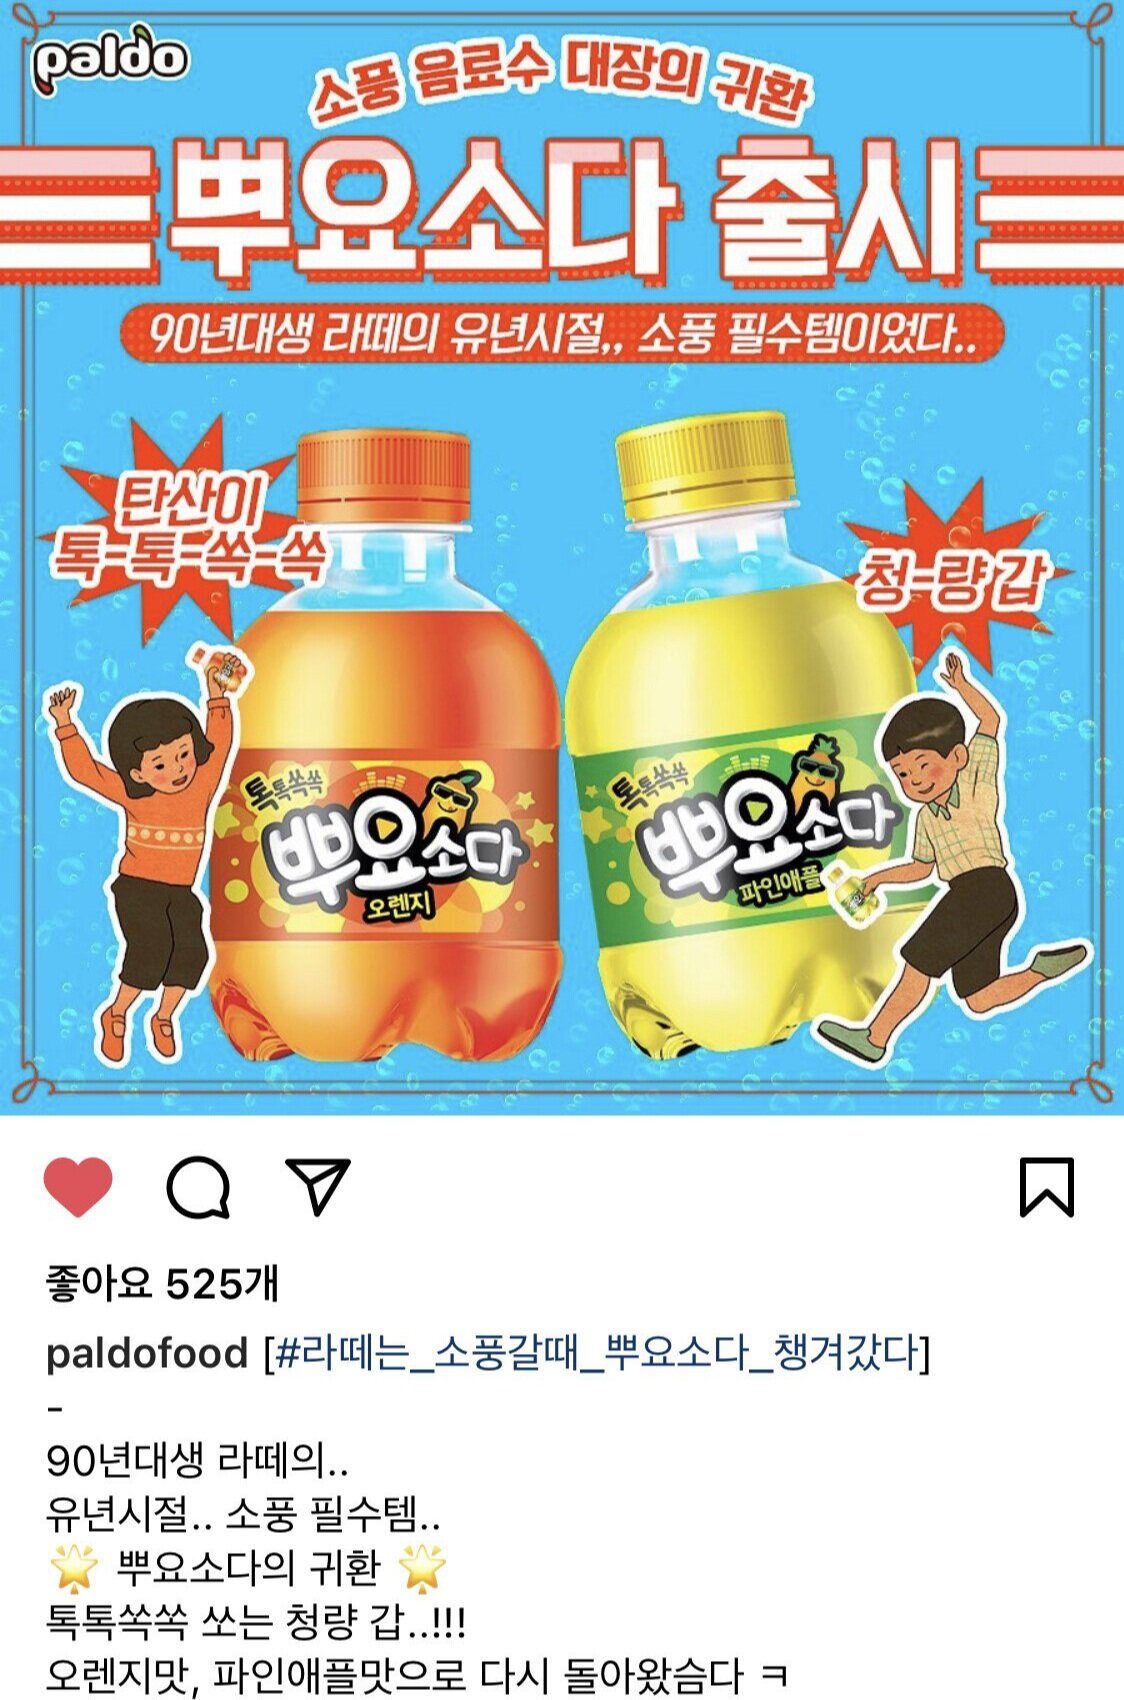 Re-launch of Puyo Soda, a beverage from the 2000s, has been confirmed.